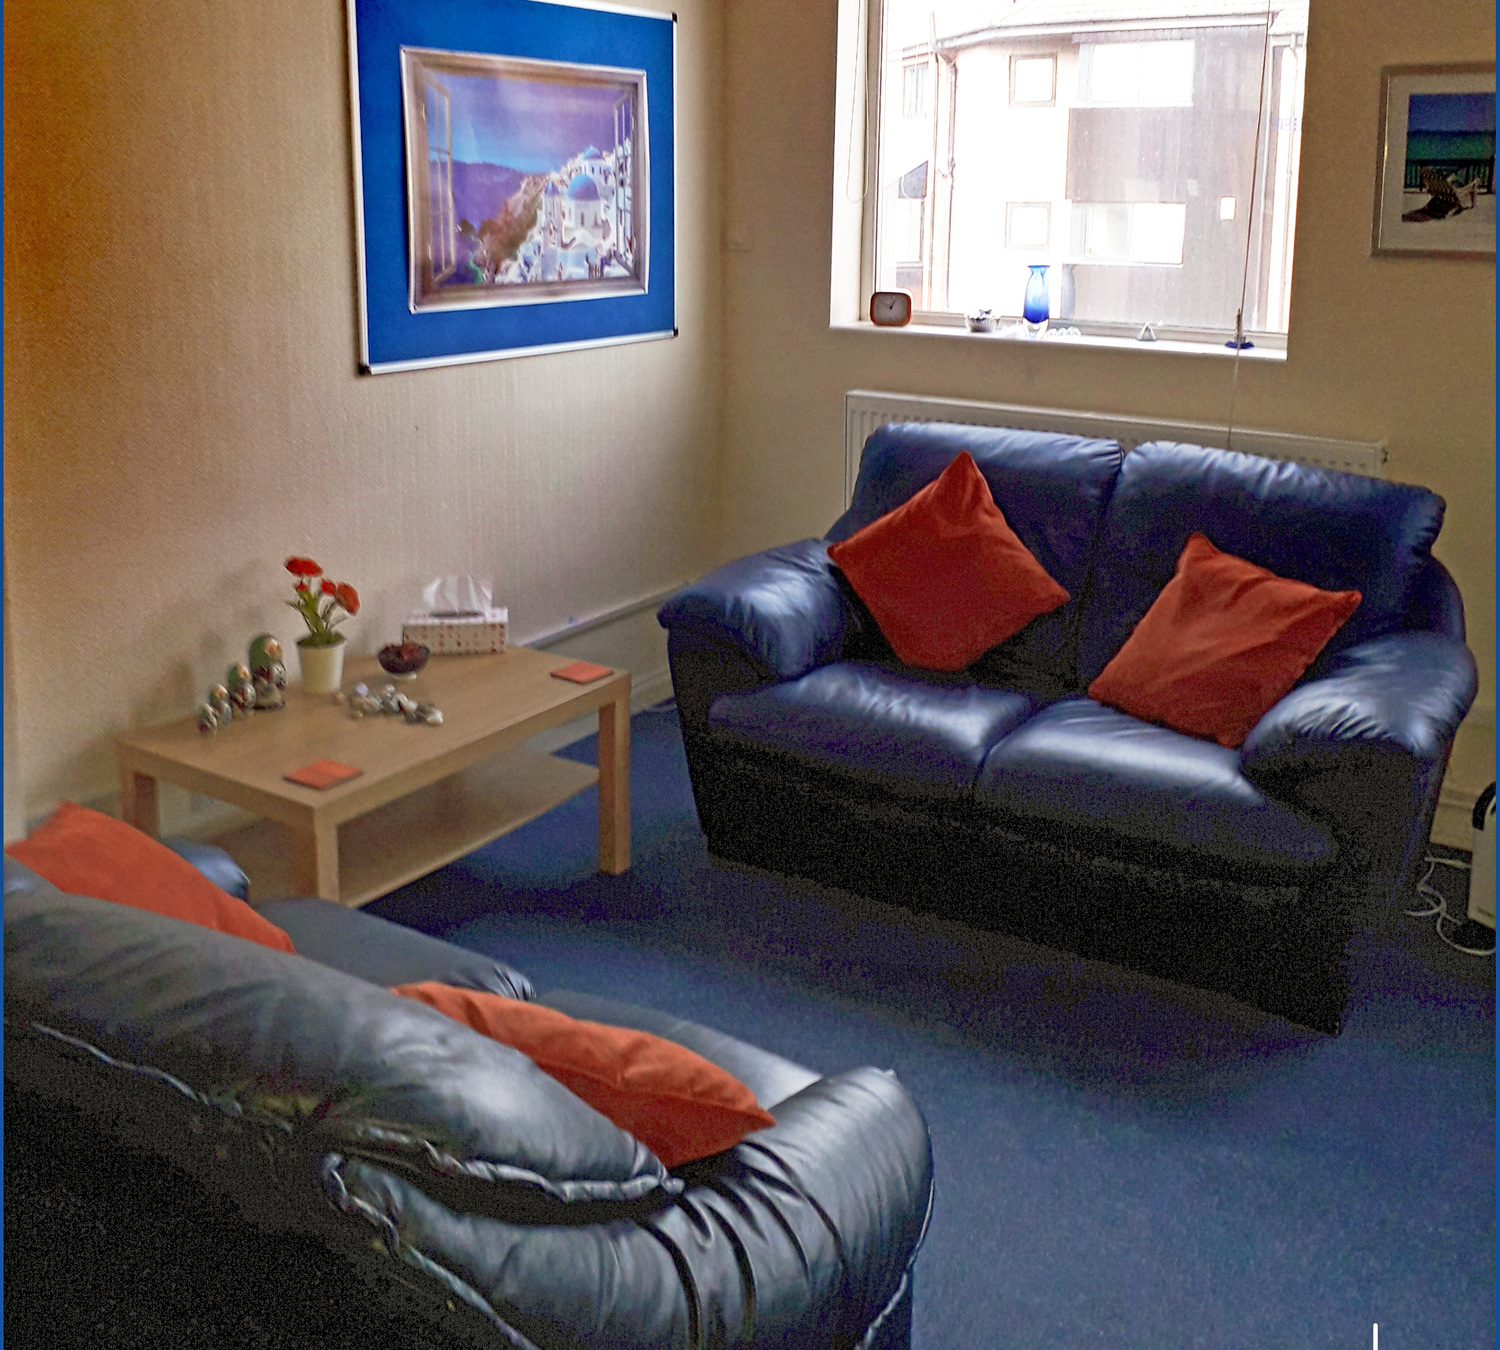 Gallery Photo of Our counselling rooms are a safe and comfortable private space where you can speak in confidence with your counsellor